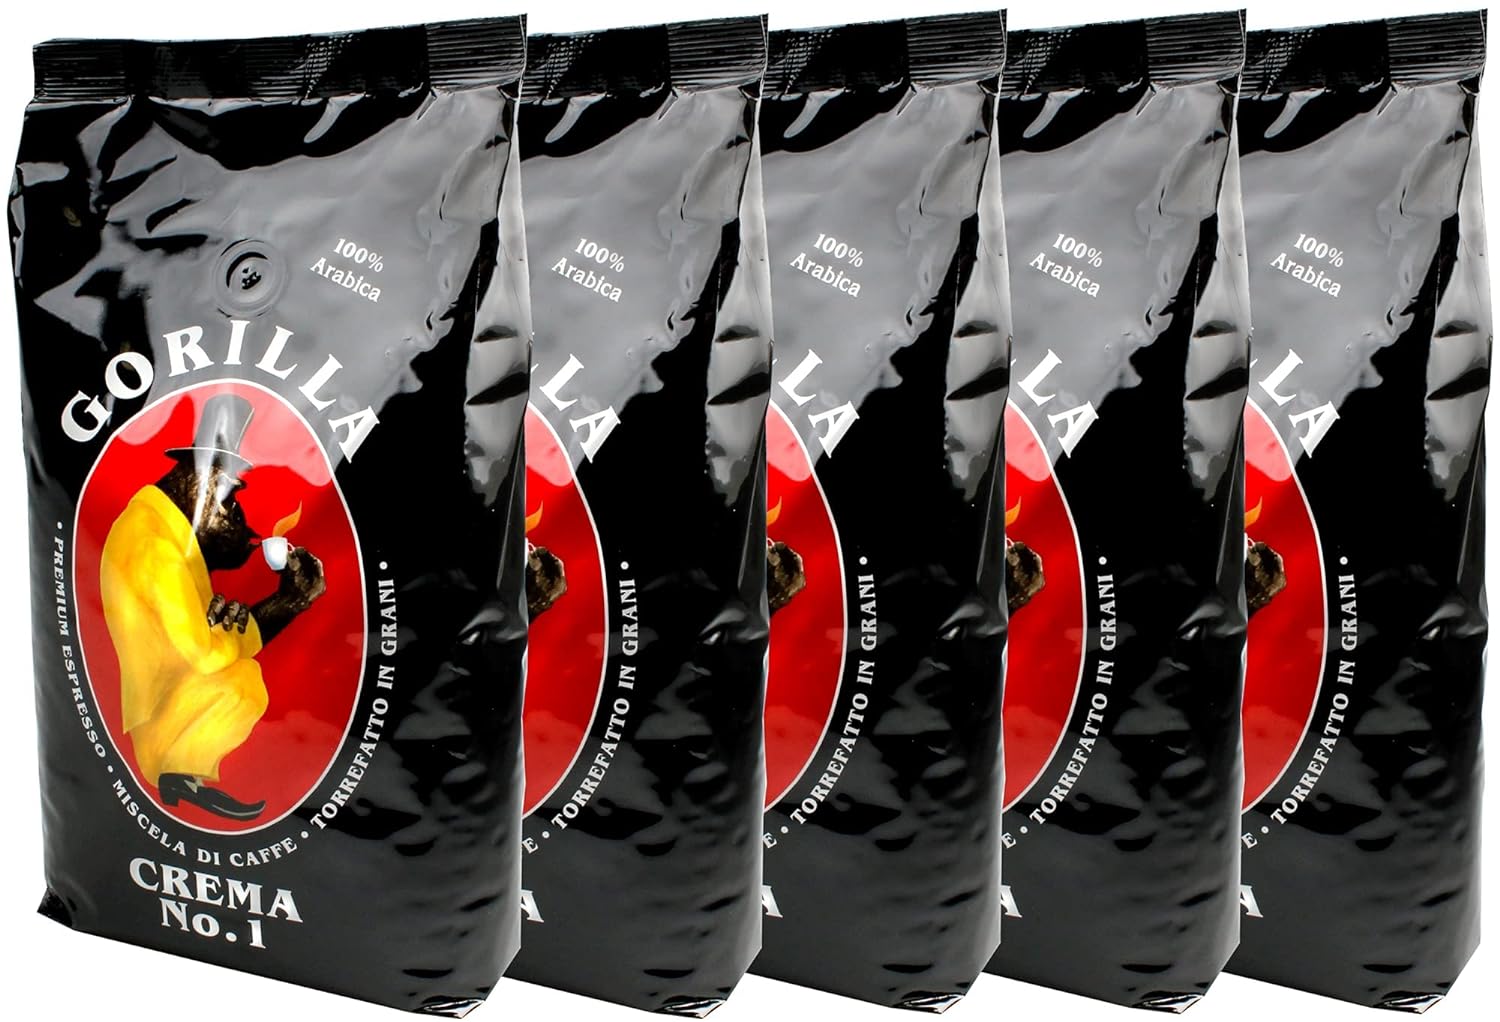 Joerges Espresso Gorilla Crema No. 1 5 pack (5x 1 kg) | Whole coffee beans | A total of 5kg roasted coffee for fully automatic machines and portafilter